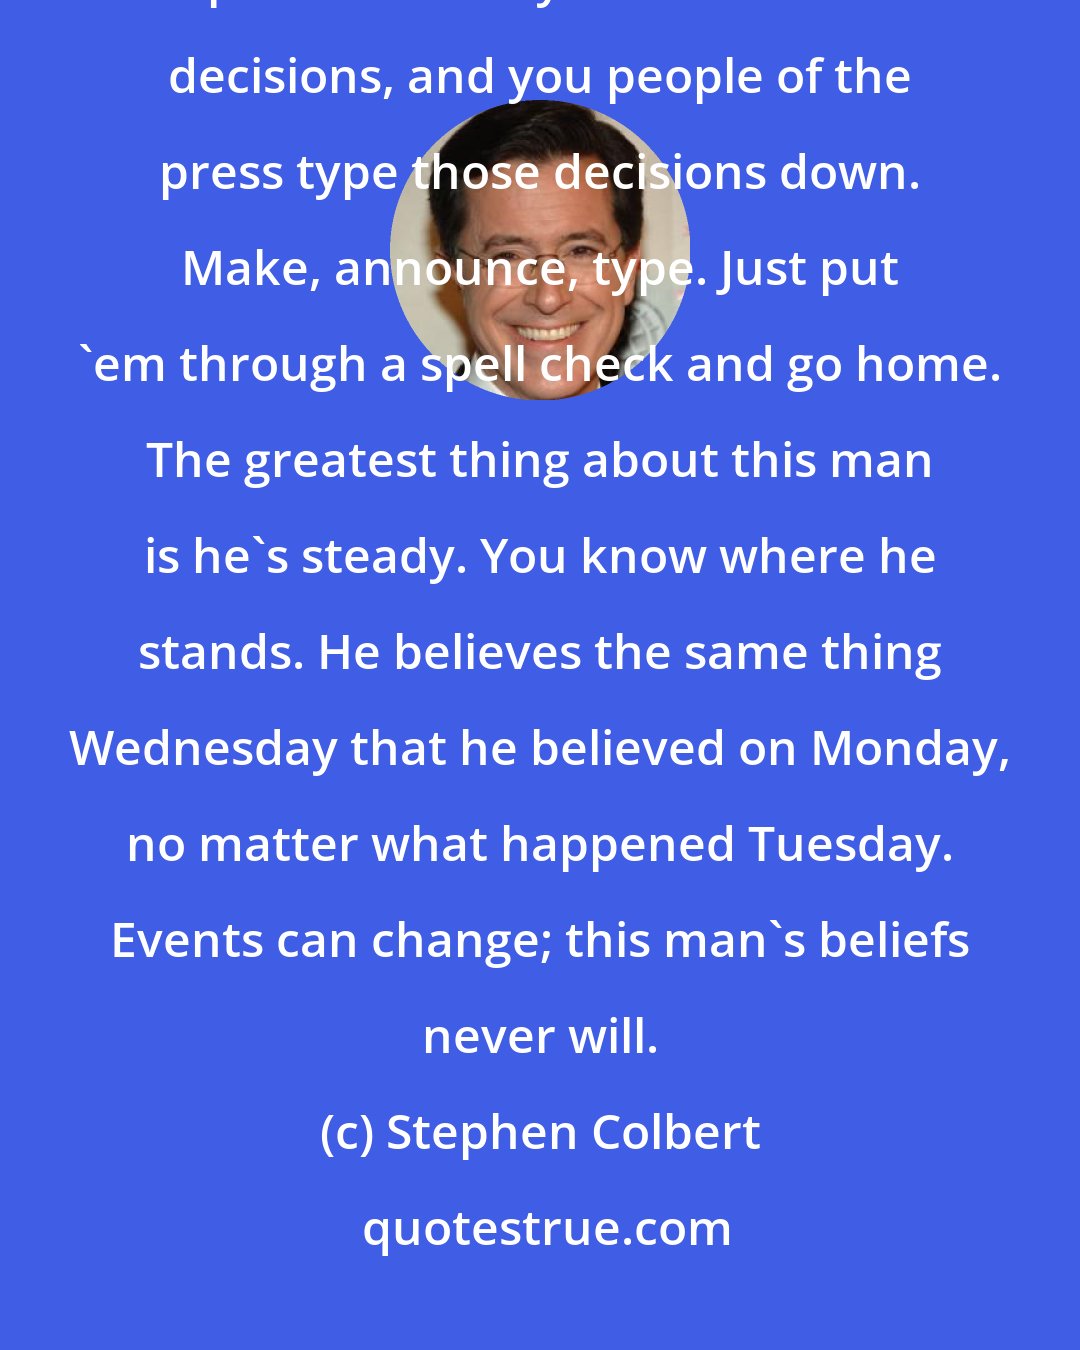 Stephen Colbert: Here's how it works: the president makes decisions. He's the decider. The press secretary announces those decisions, and you people of the press type those decisions down. Make, announce, type. Just put 'em through a spell check and go home. The greatest thing about this man is he's steady. You know where he stands. He believes the same thing Wednesday that he believed on Monday, no matter what happened Tuesday. Events can change; this man's beliefs never will.